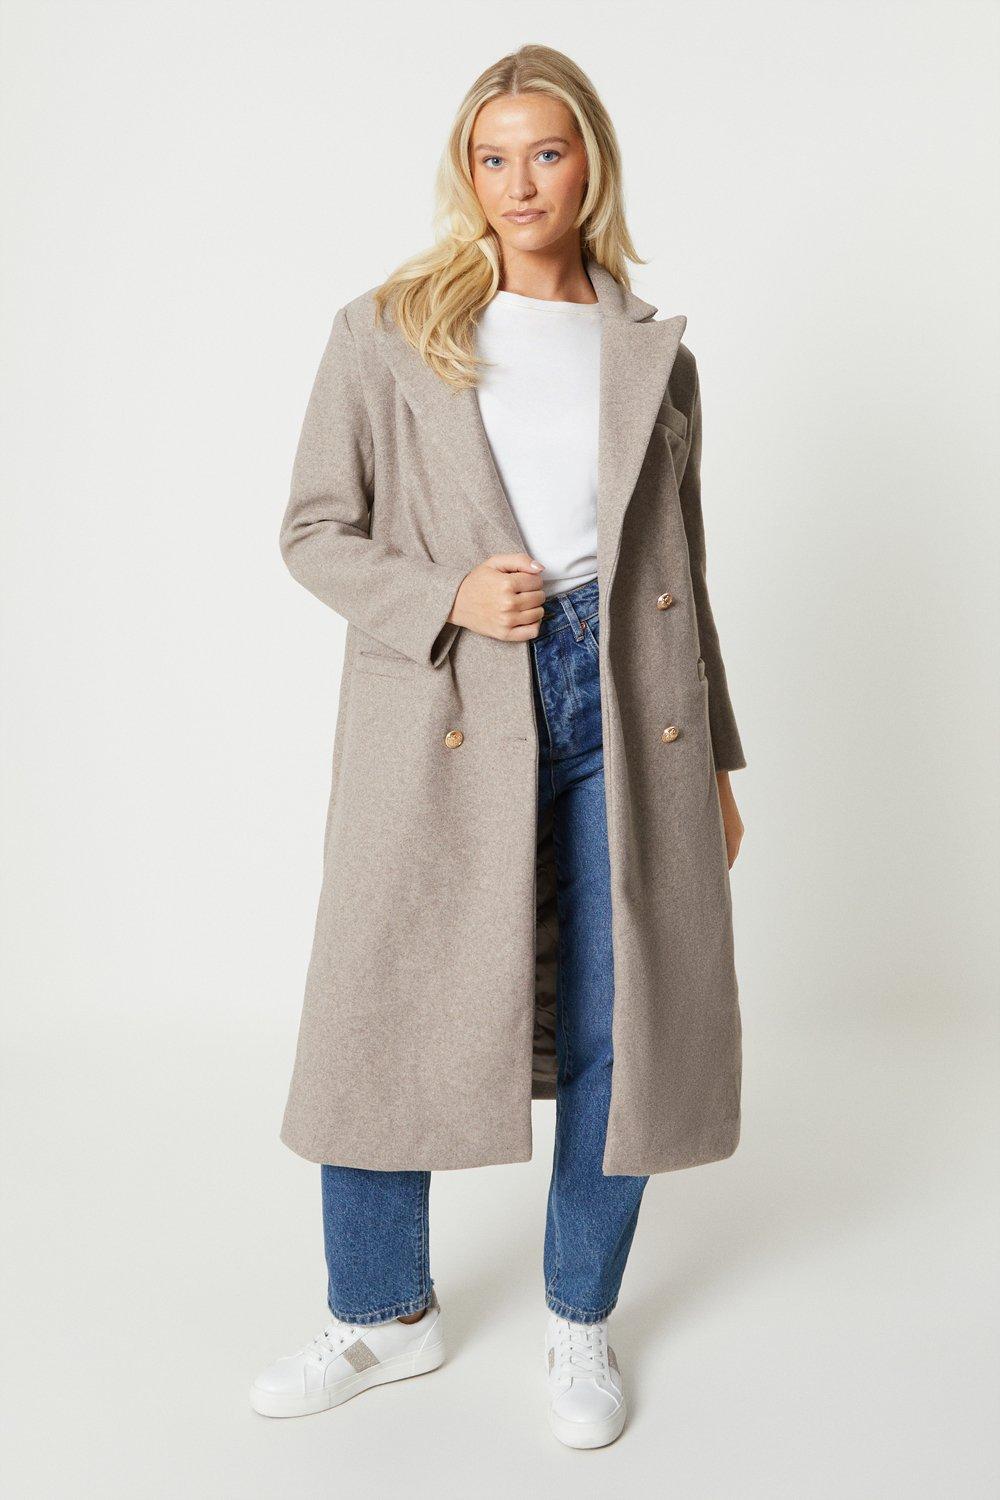 Women's Longline Double Breasted Formal Coat - taupe - S